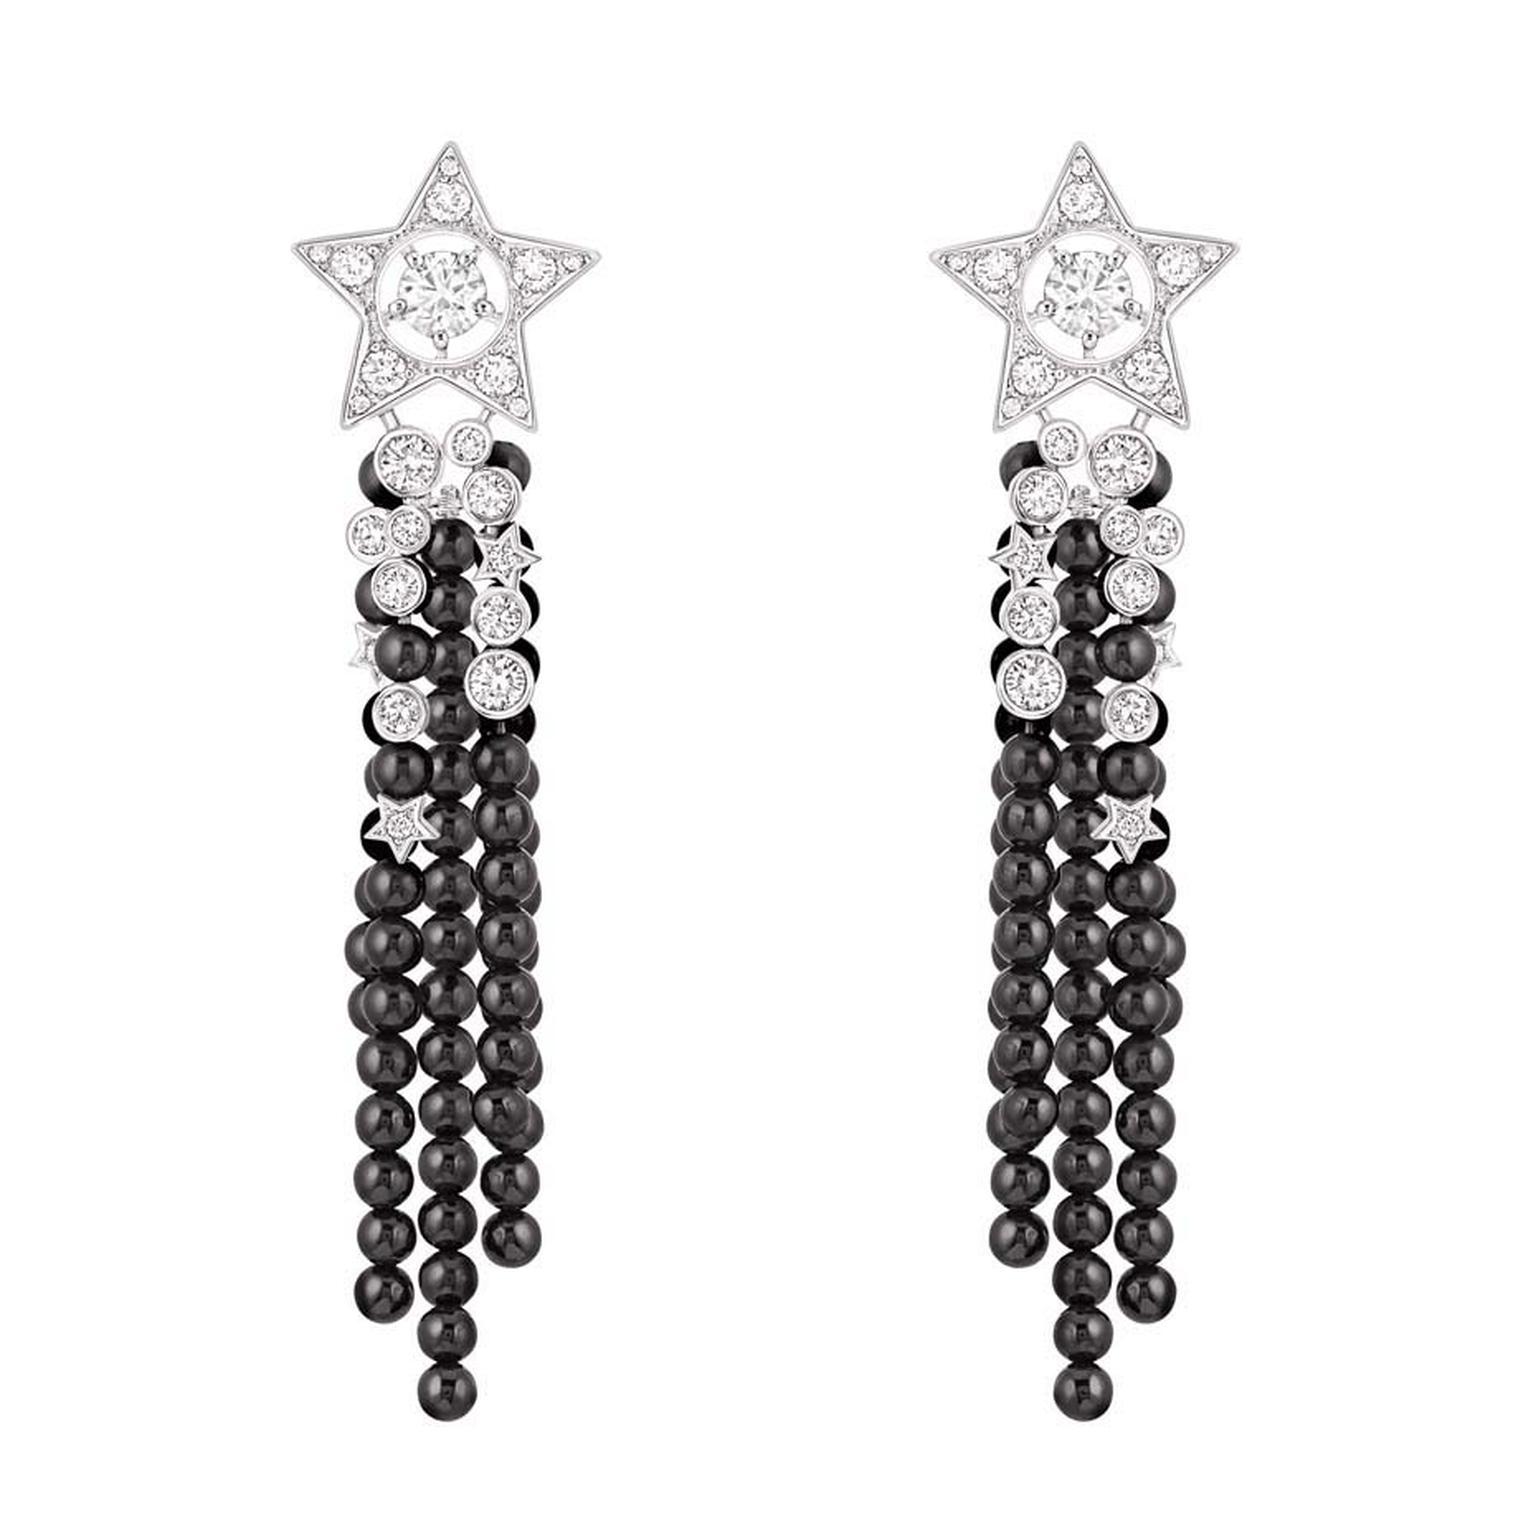 Chanel Nuit de Diamants earrings in white gold with diamonds and black spinel beads.